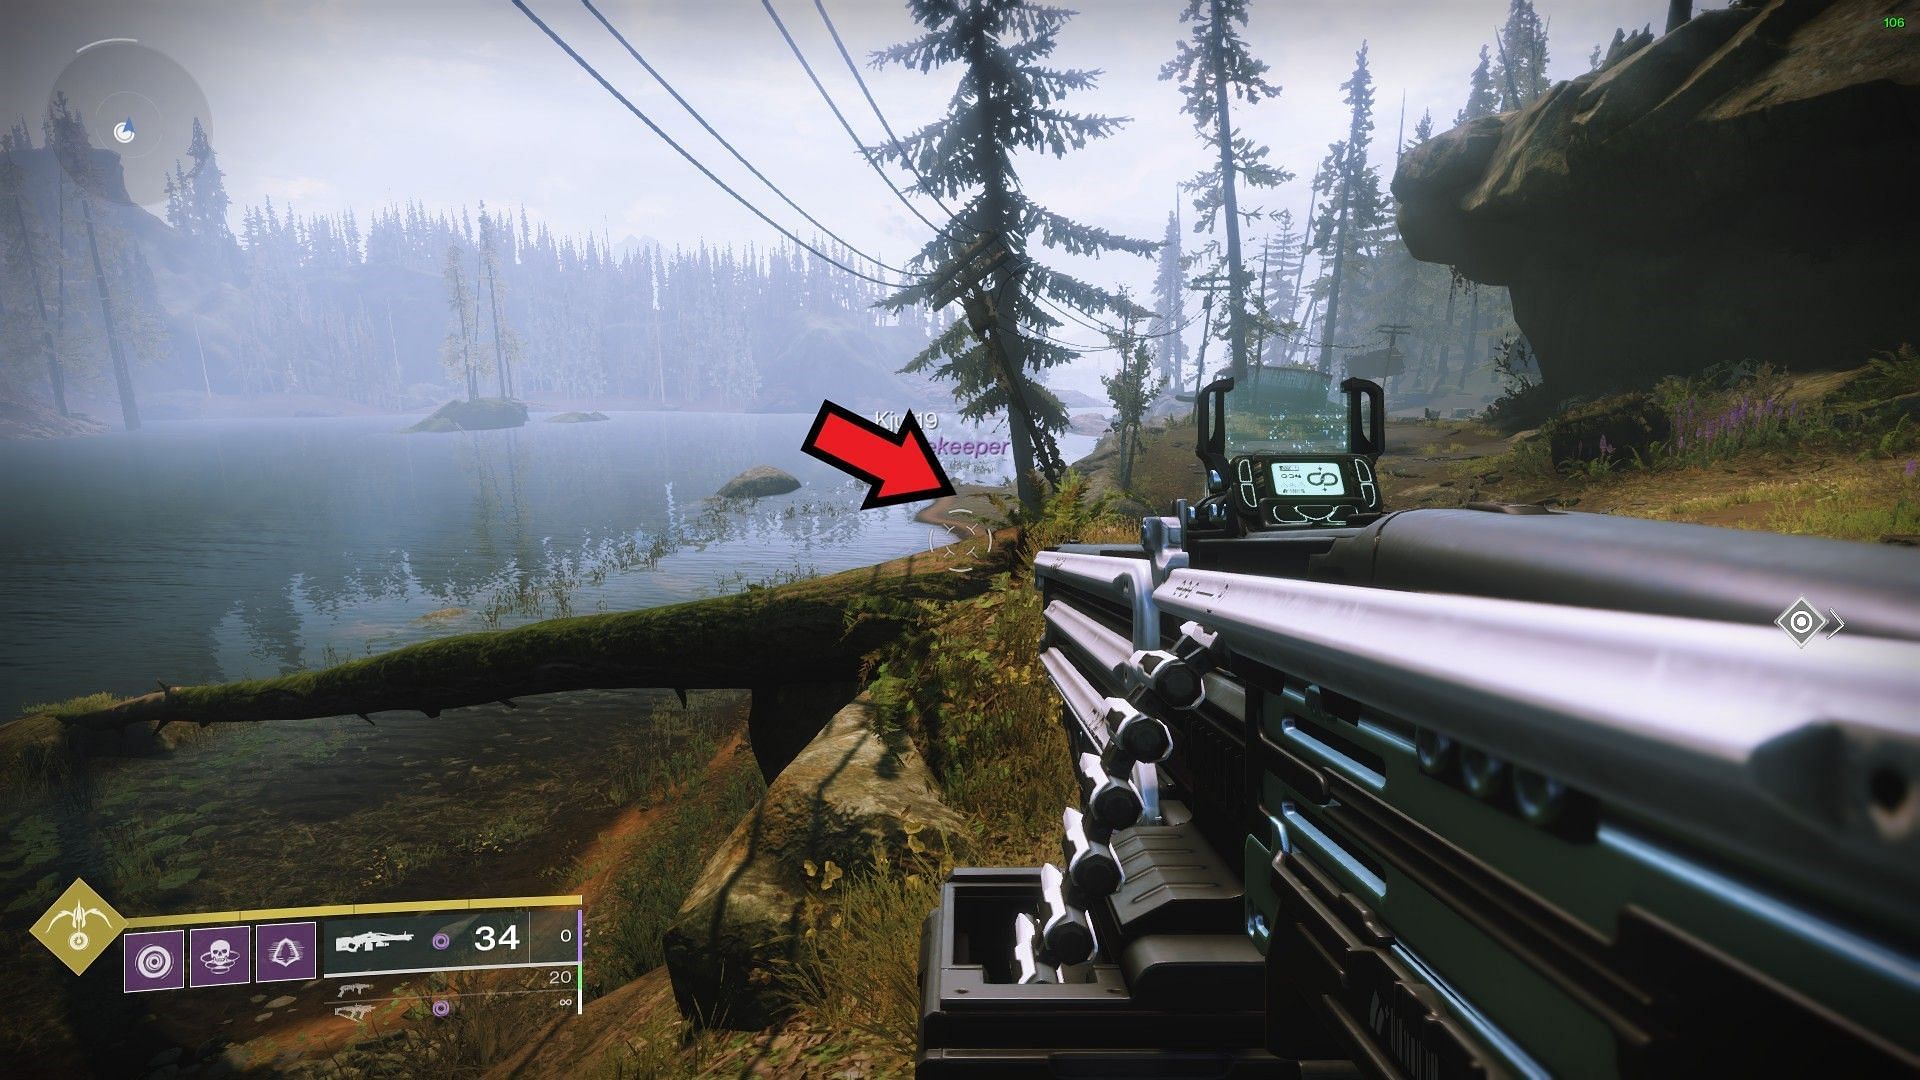 Pawprints at the Outskirts (Image via Bungie)